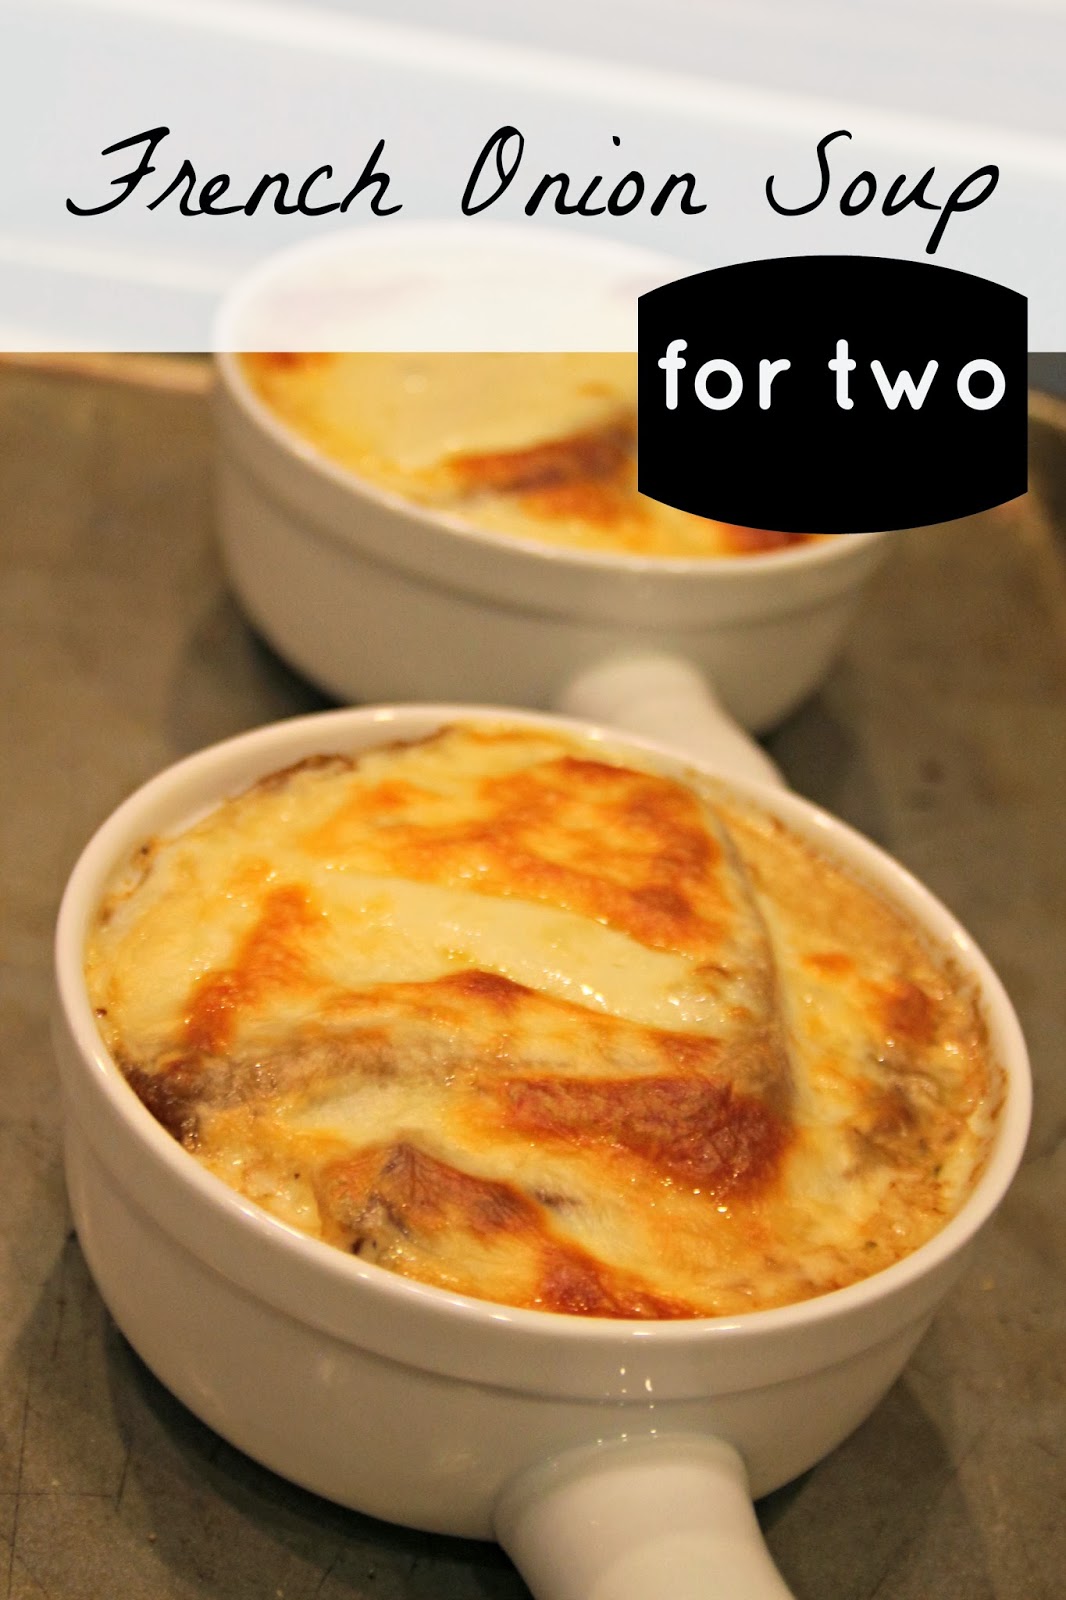 The Sustainable Couple: Spending Strike: Day 27 - French Onion Soup for TWO